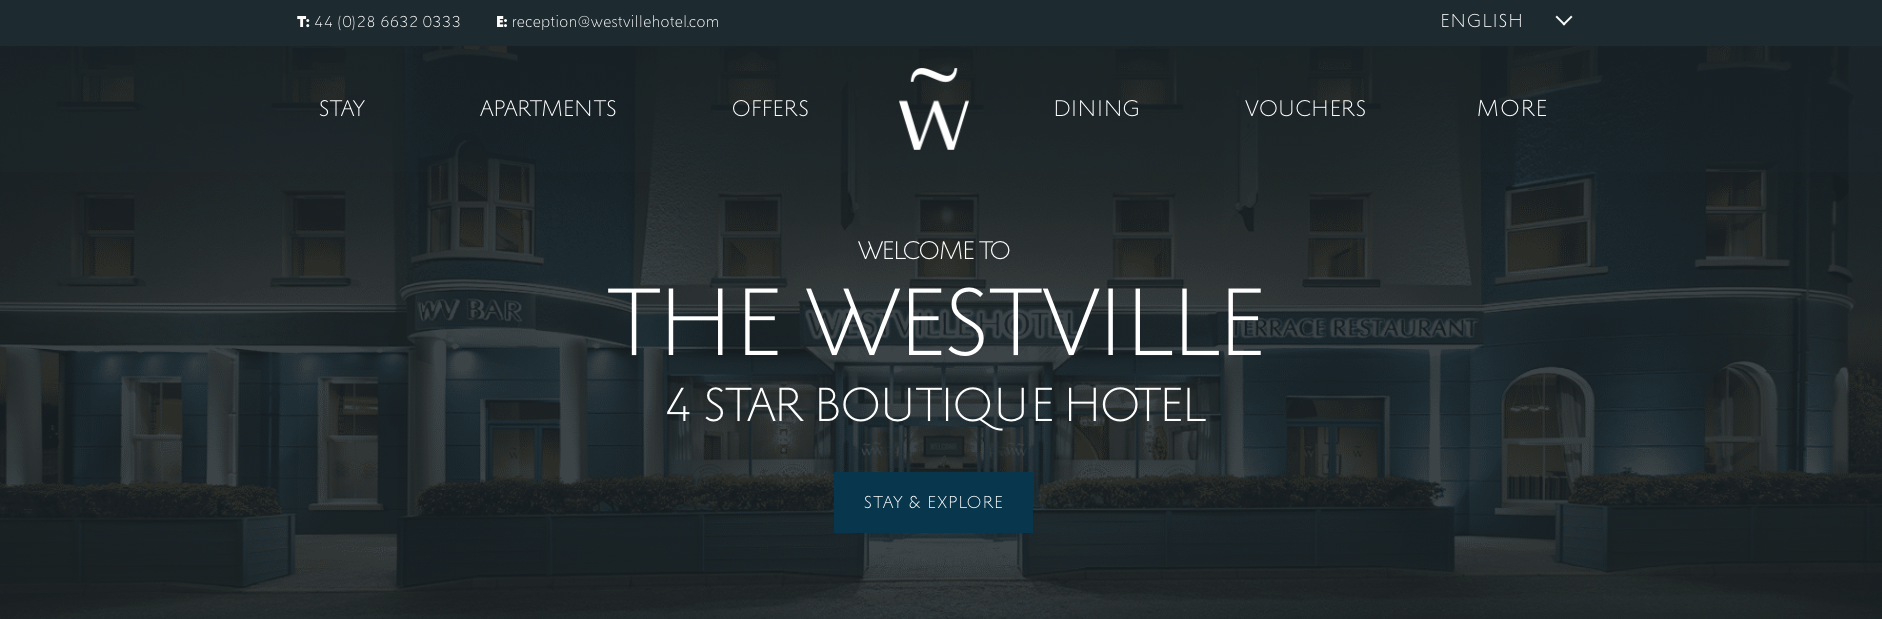 Web Design for Hotels: A Case Study Review